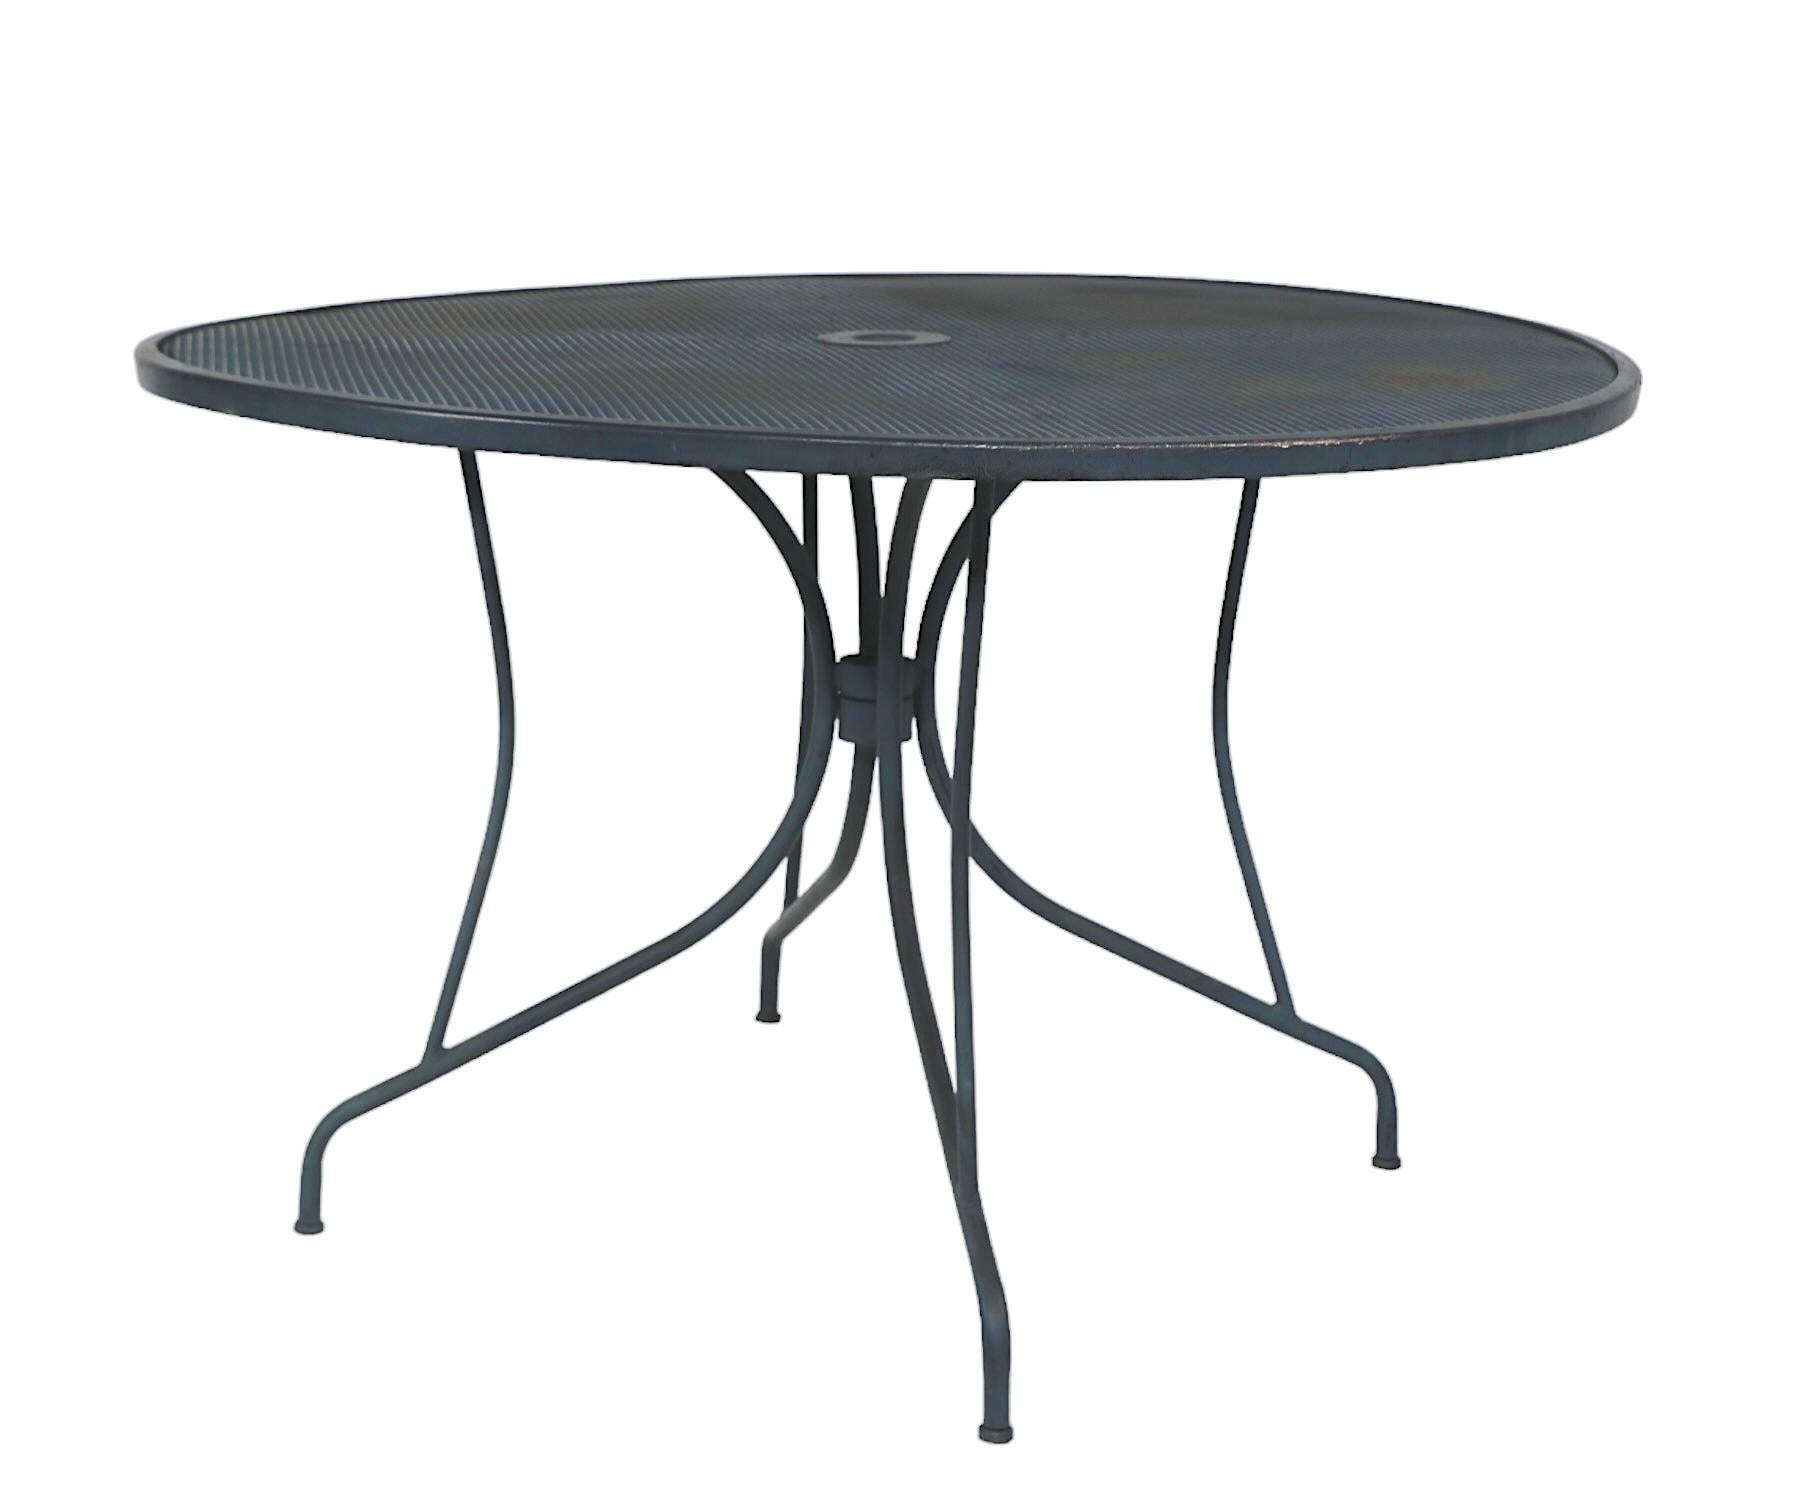 Metal Vintage Garden Patio Poolside Cafe Dining Table by Meadowcraft c. 1950/60's For Sale